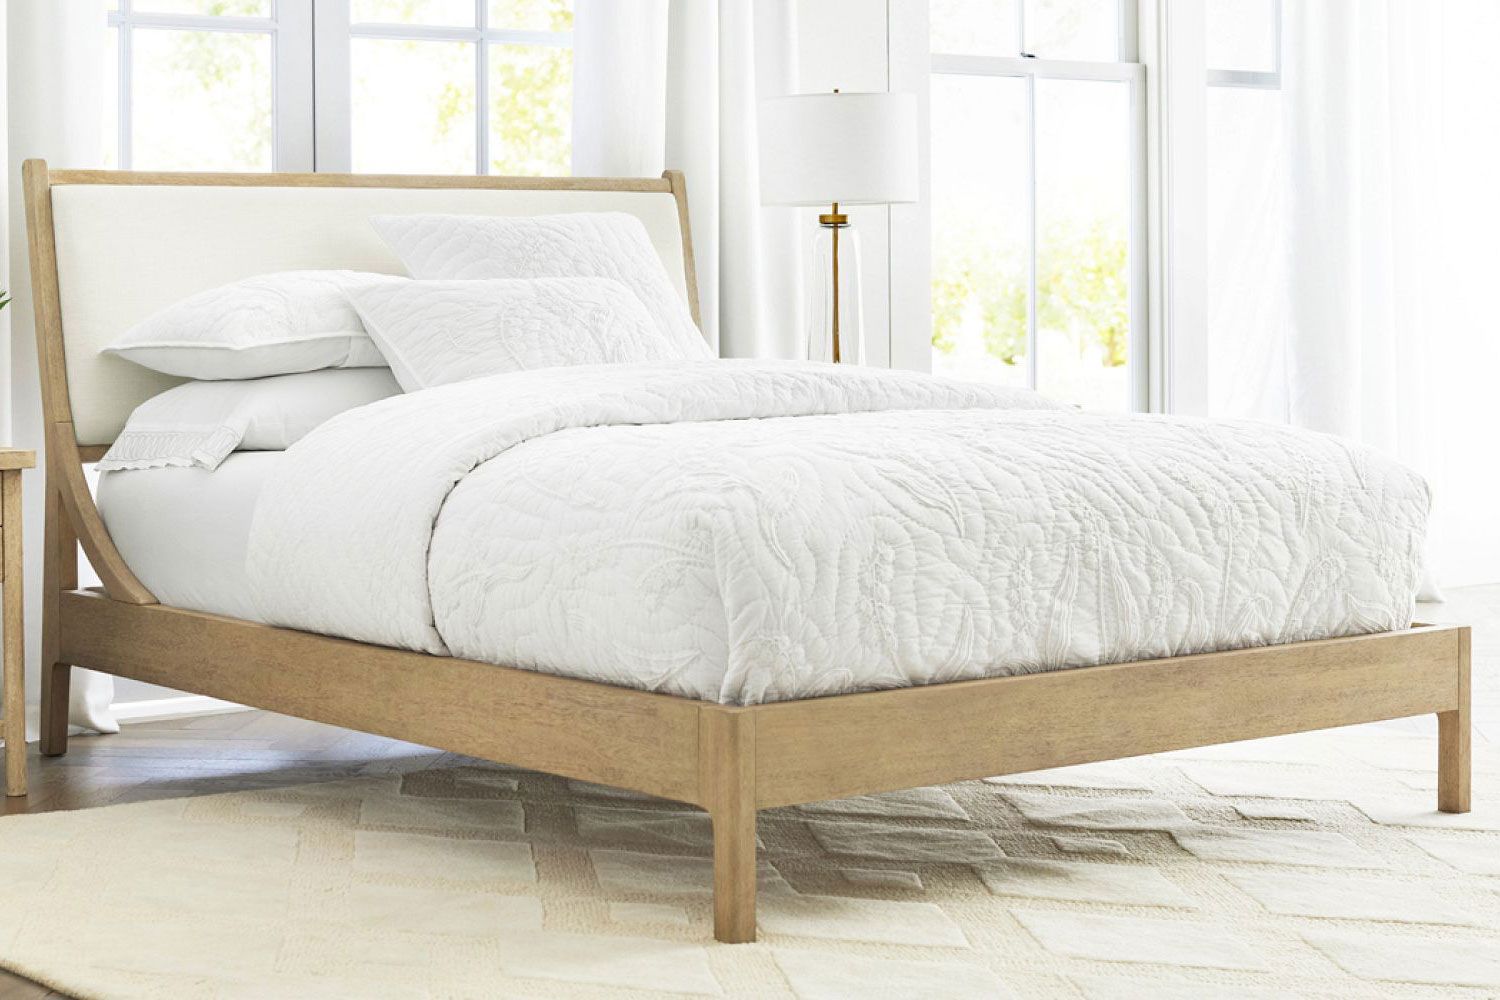 Understated Elegance: Redefine Your Sleep Space With a Panel Bed Frame  